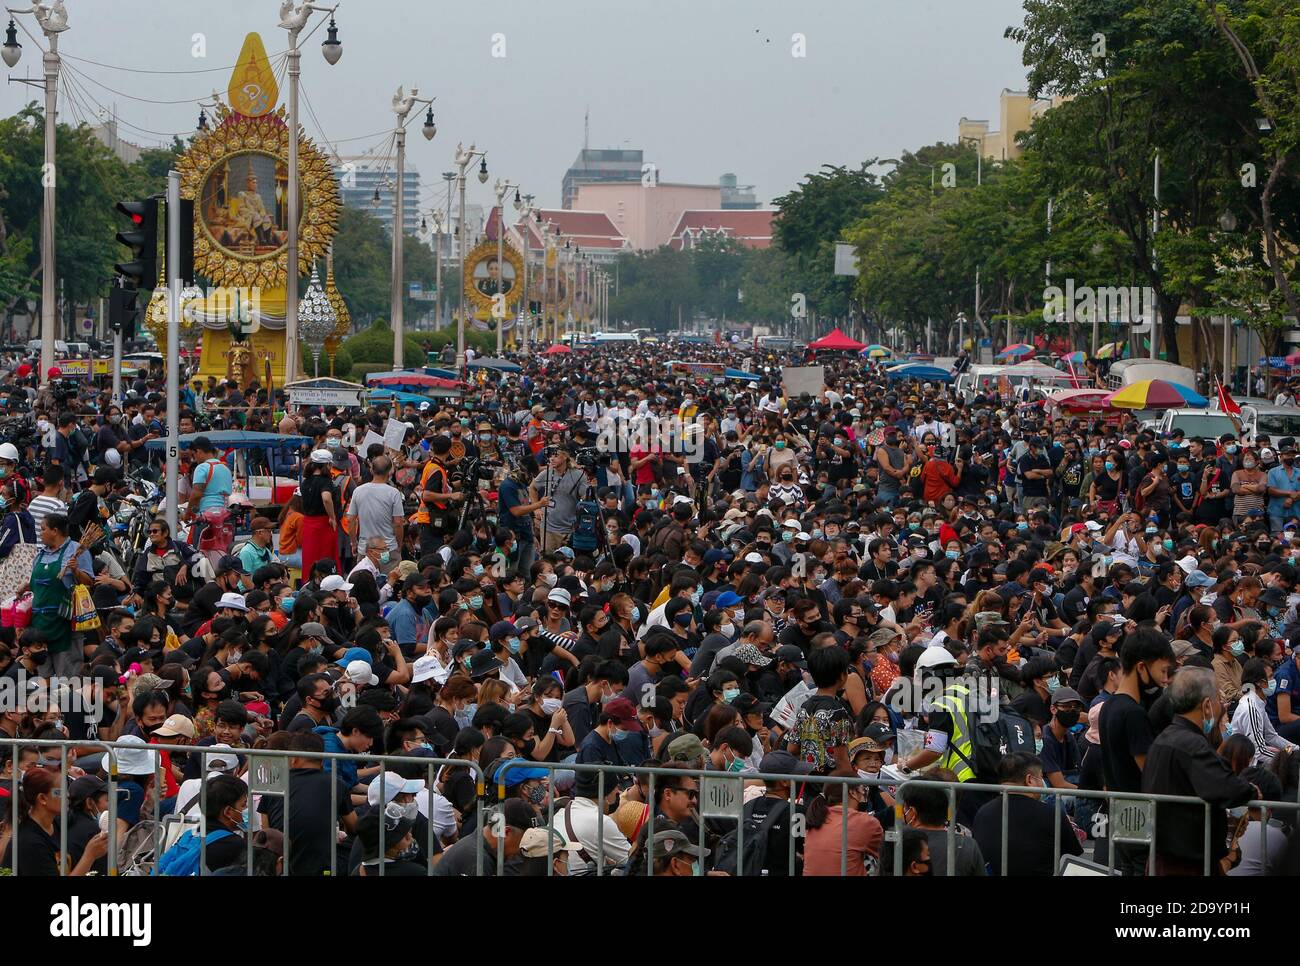 Huge crowd of protesters during the demonstration. Police fired water cannons at pro-democracy protesters to prevent them from marching from the Democracy monument to the Royal Household Bureau at the Grand Palace to submit letters regarding monarchy reform. The letters were placed in giant mail boxes and addressed to the bureau. Stock Photo